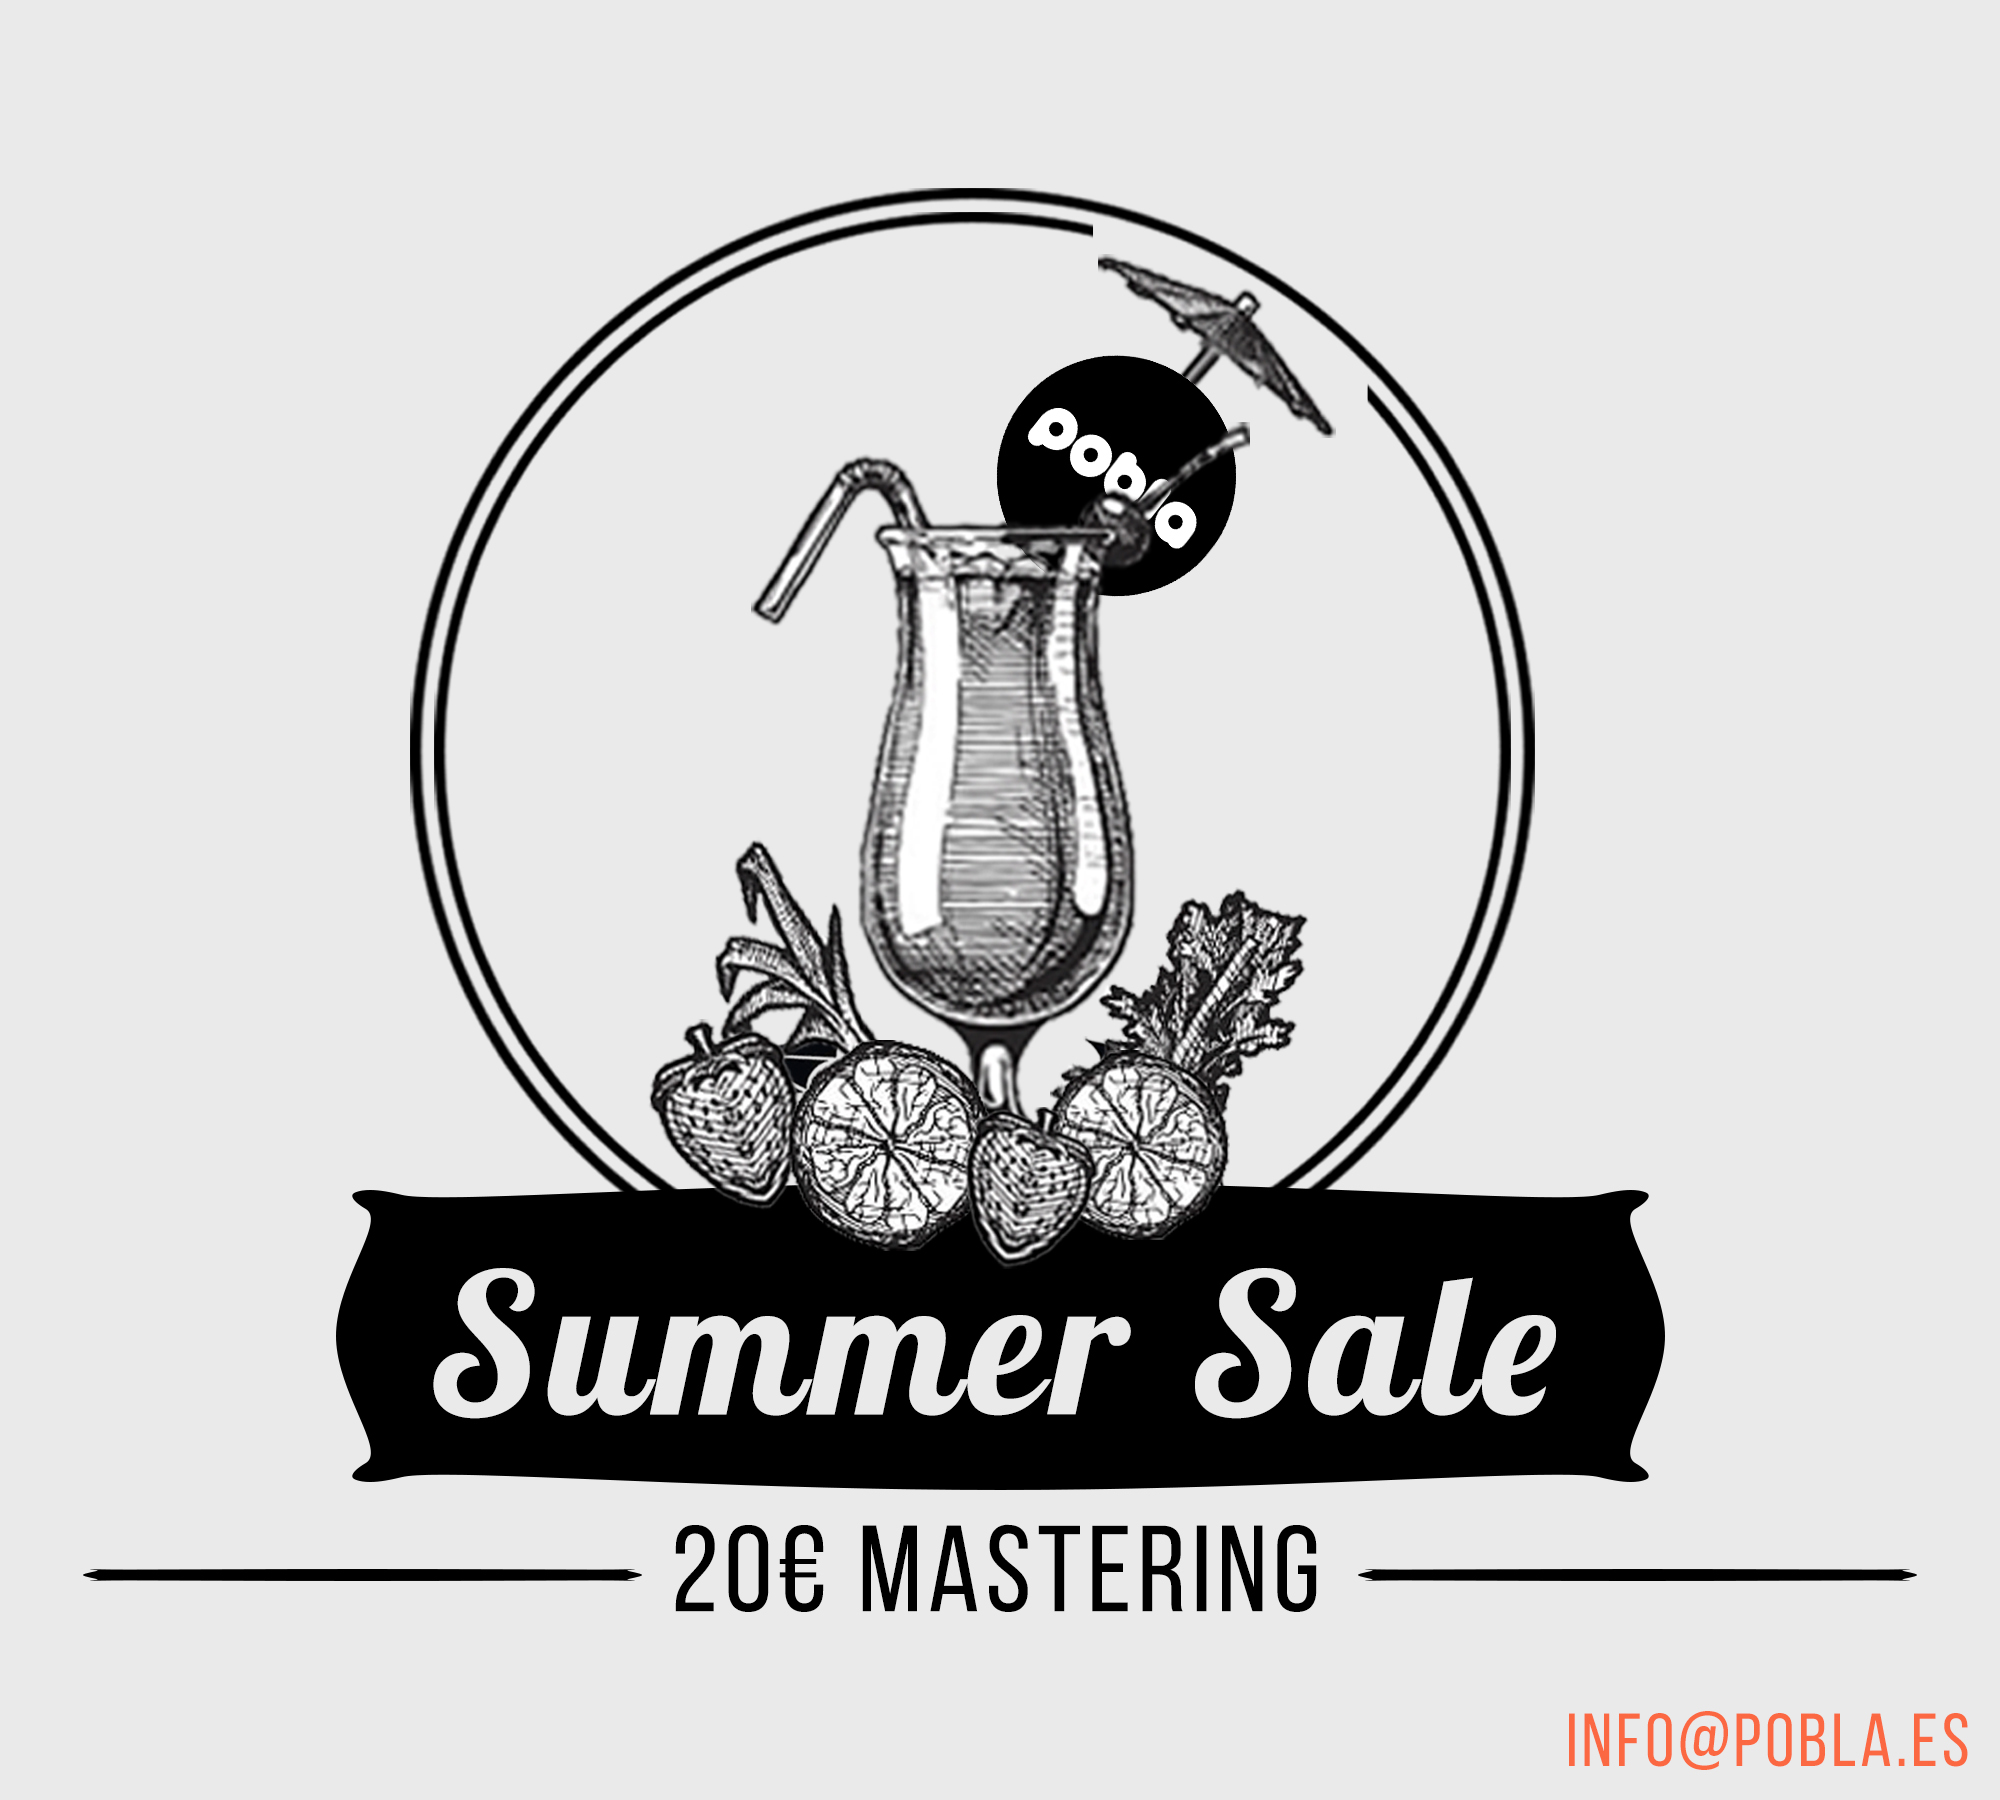 July 30th — 20€ MASTERING SUMMER SALE!